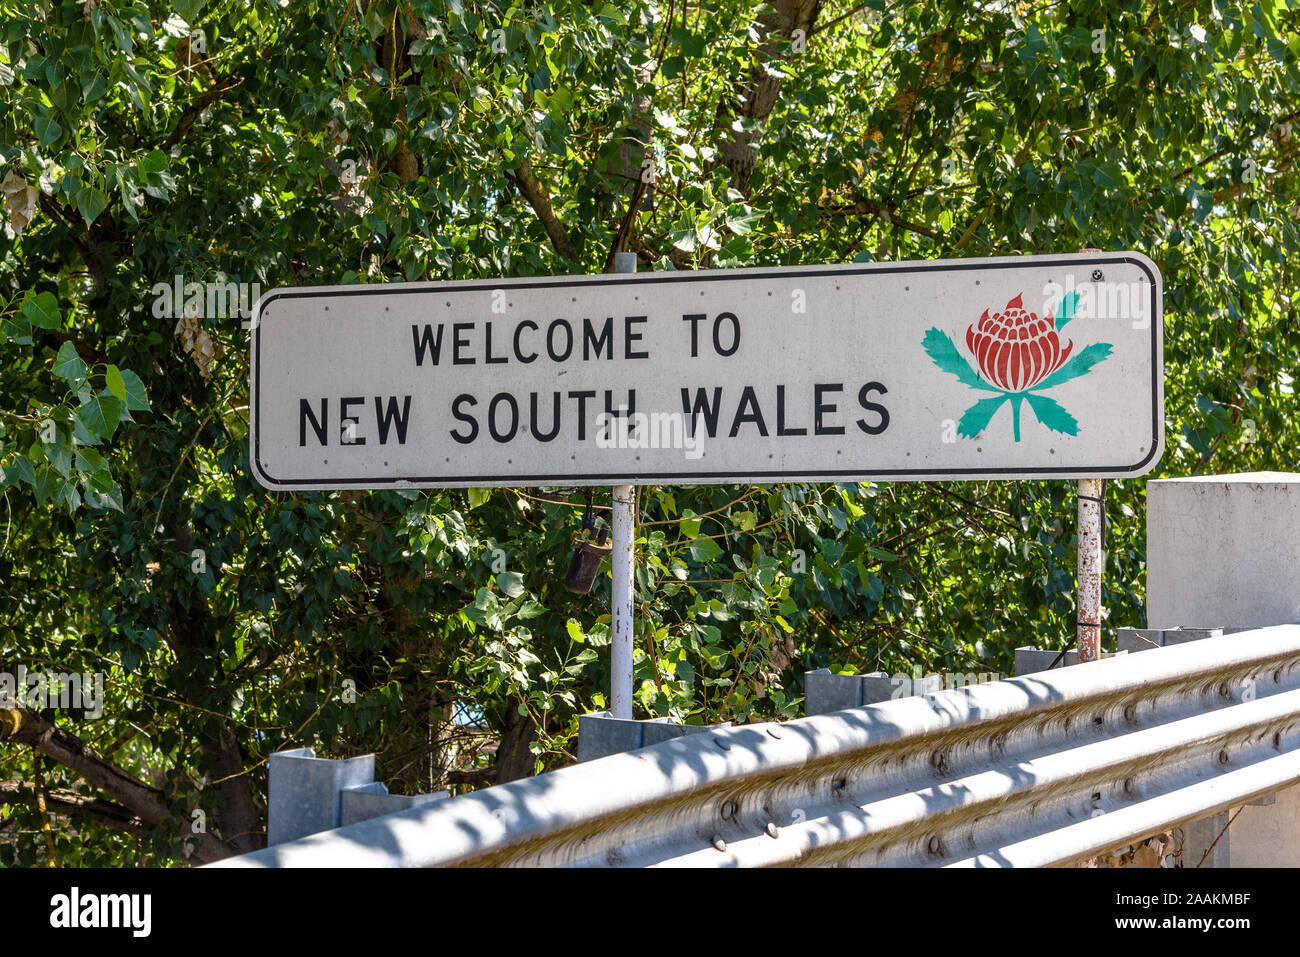 A Welcome to New South Wales road sign in Australia Stock Photo